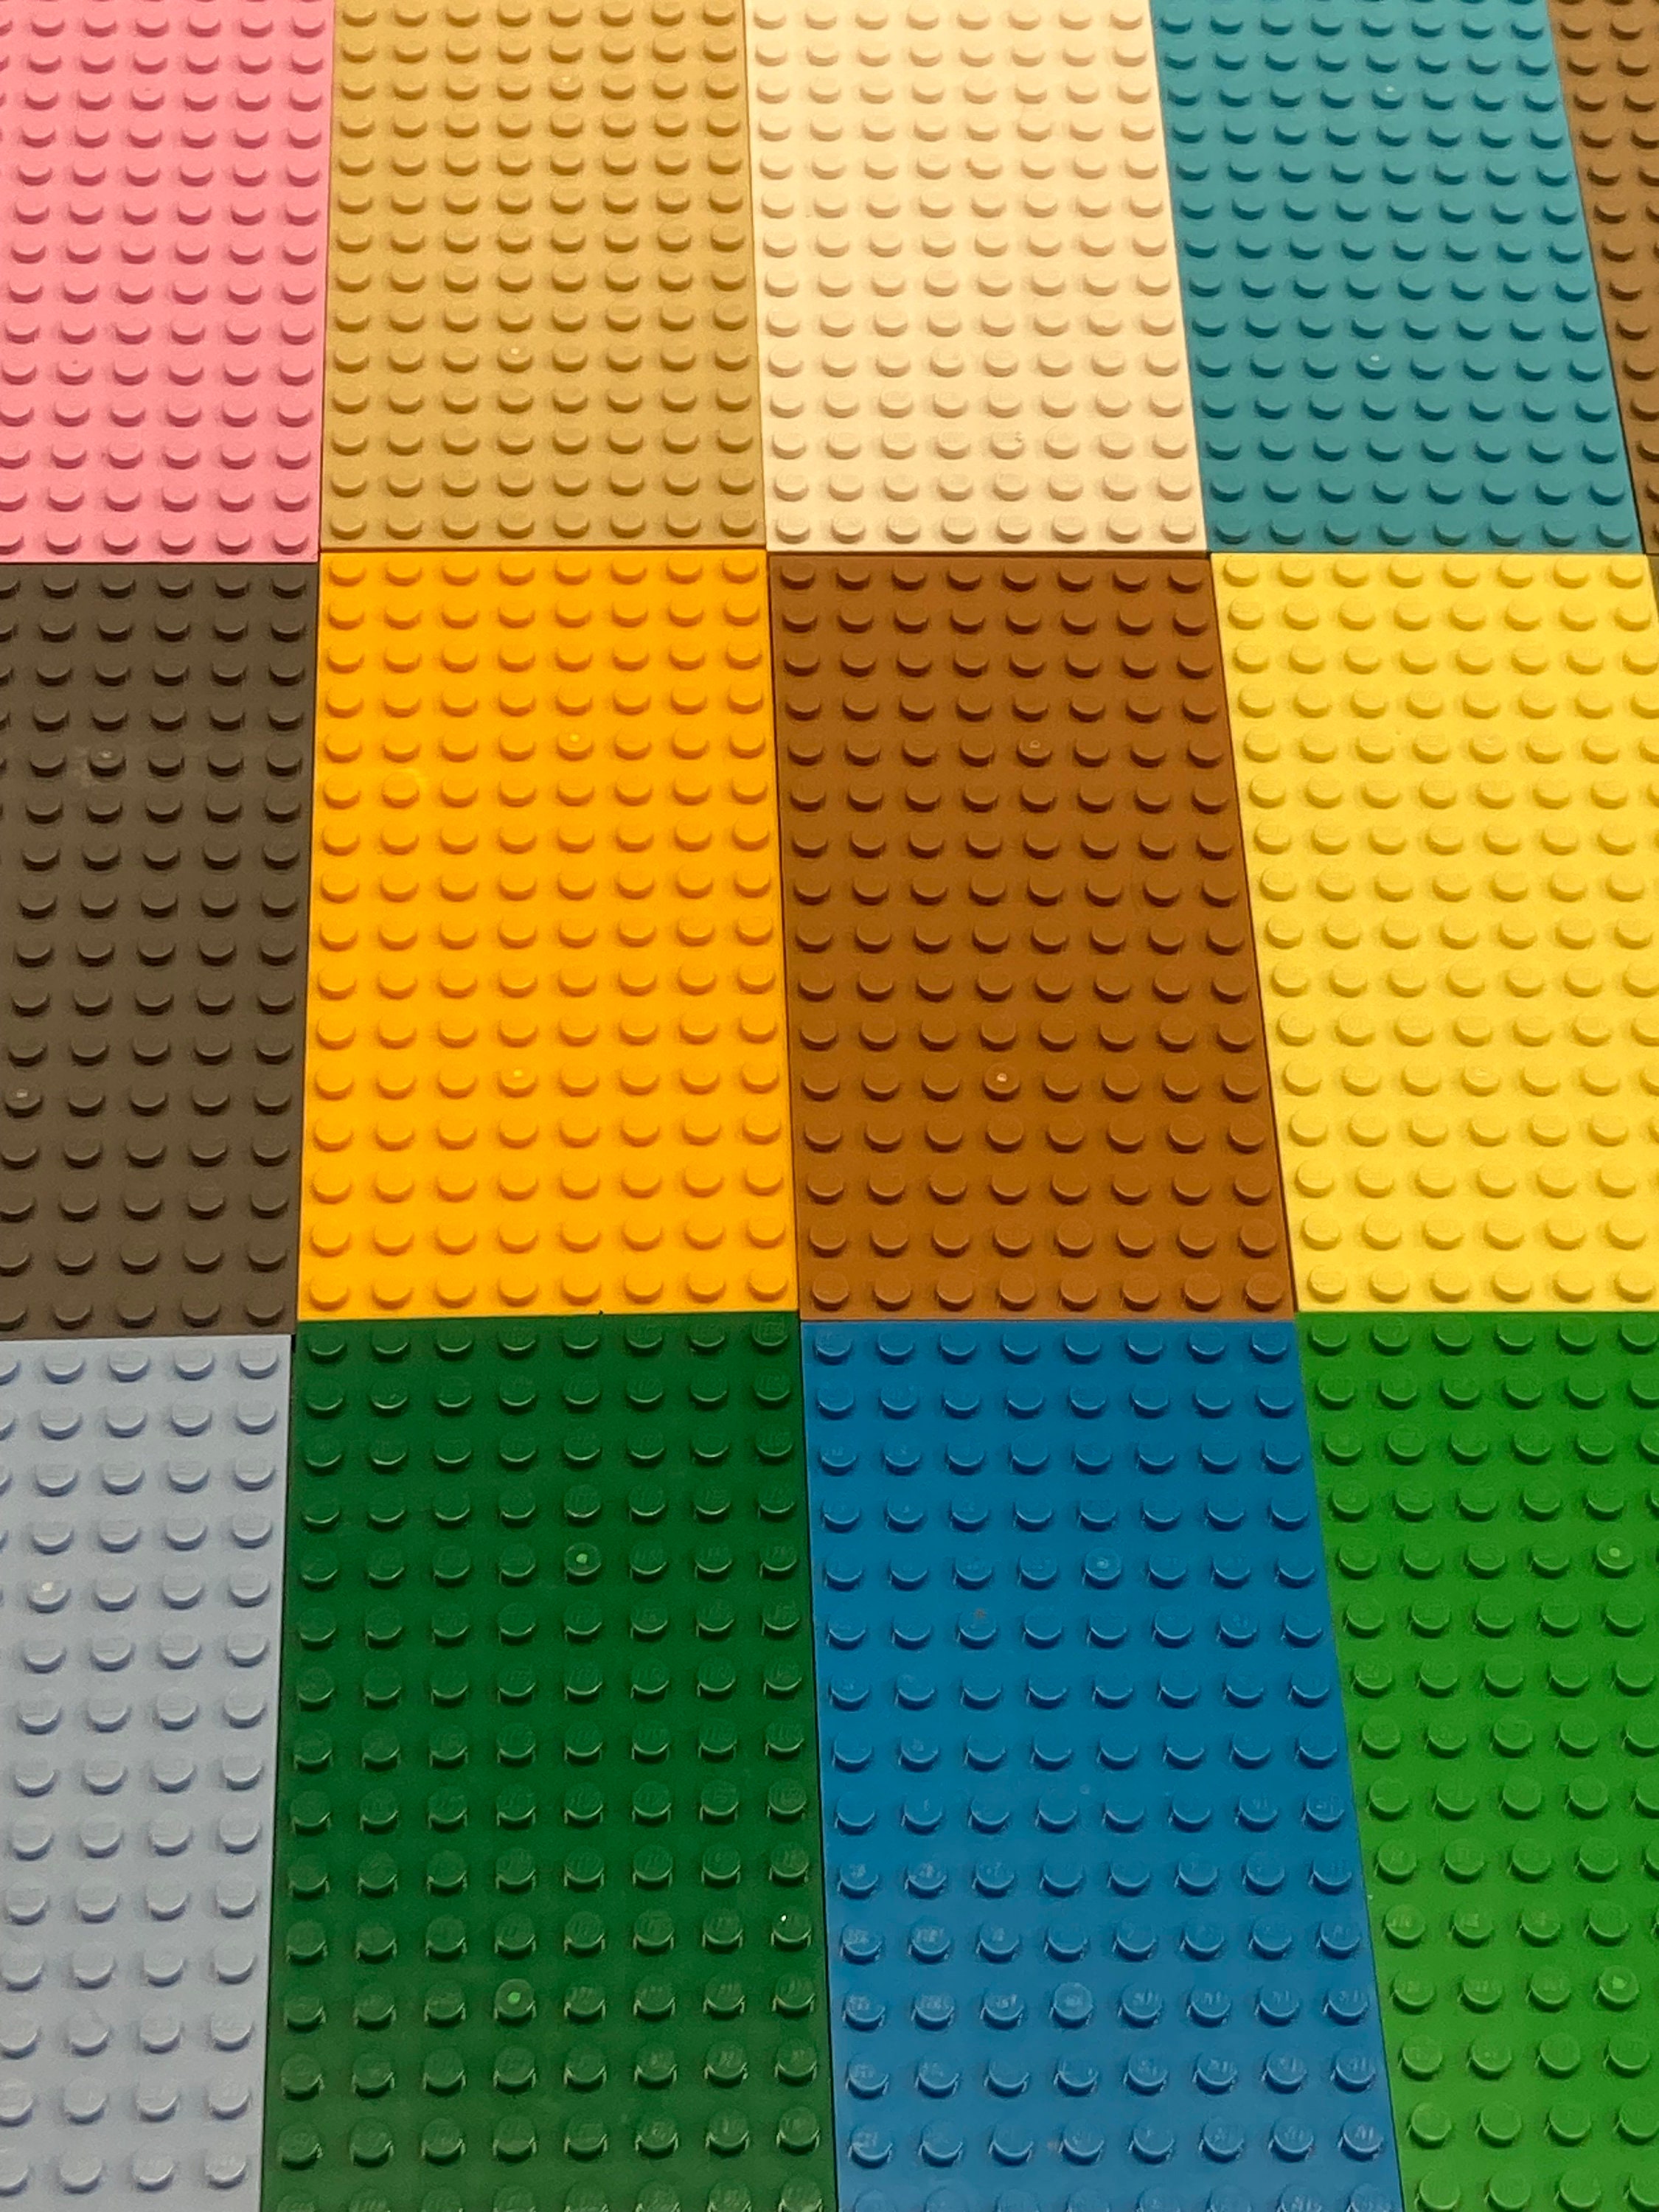 Plate 8 X Genuine 16 100% Pick COLOR Studs - Etsy LEGO® the You Clean